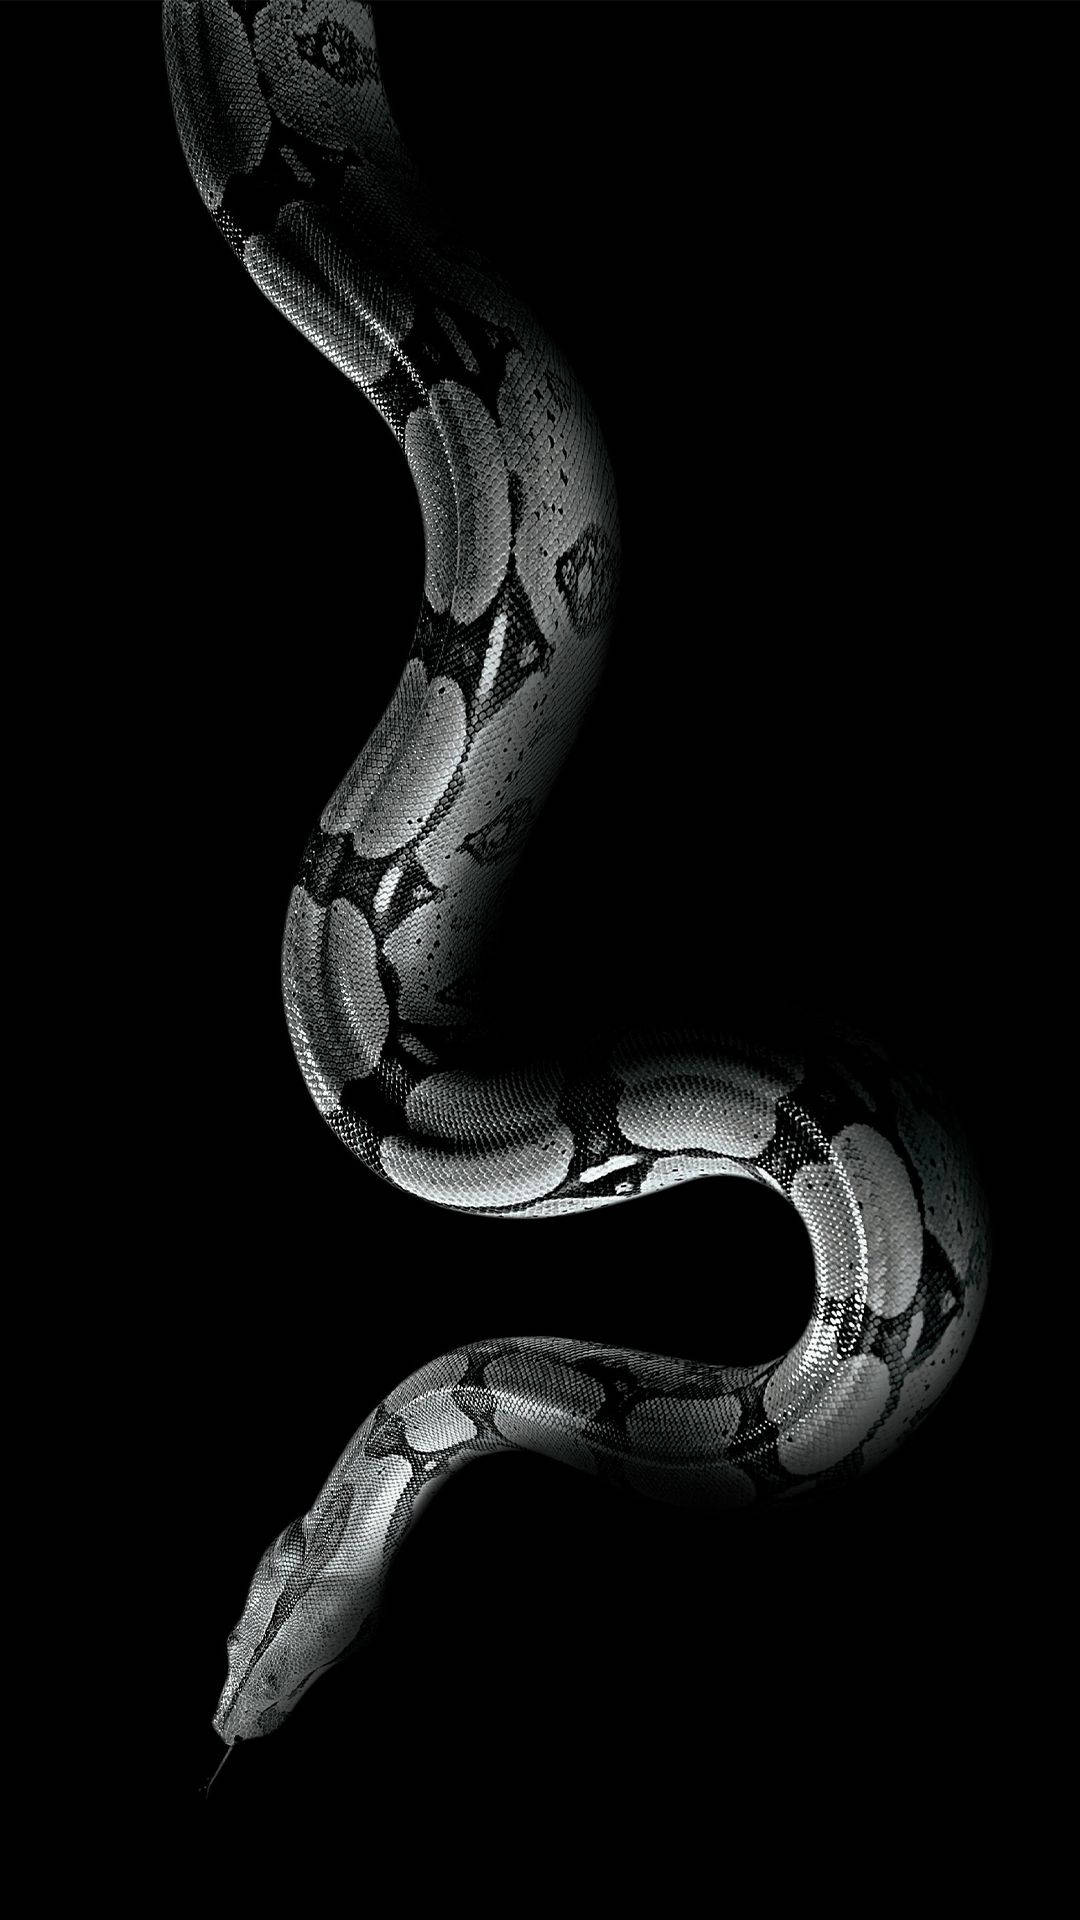 Boa Constrictor Africa Iphone